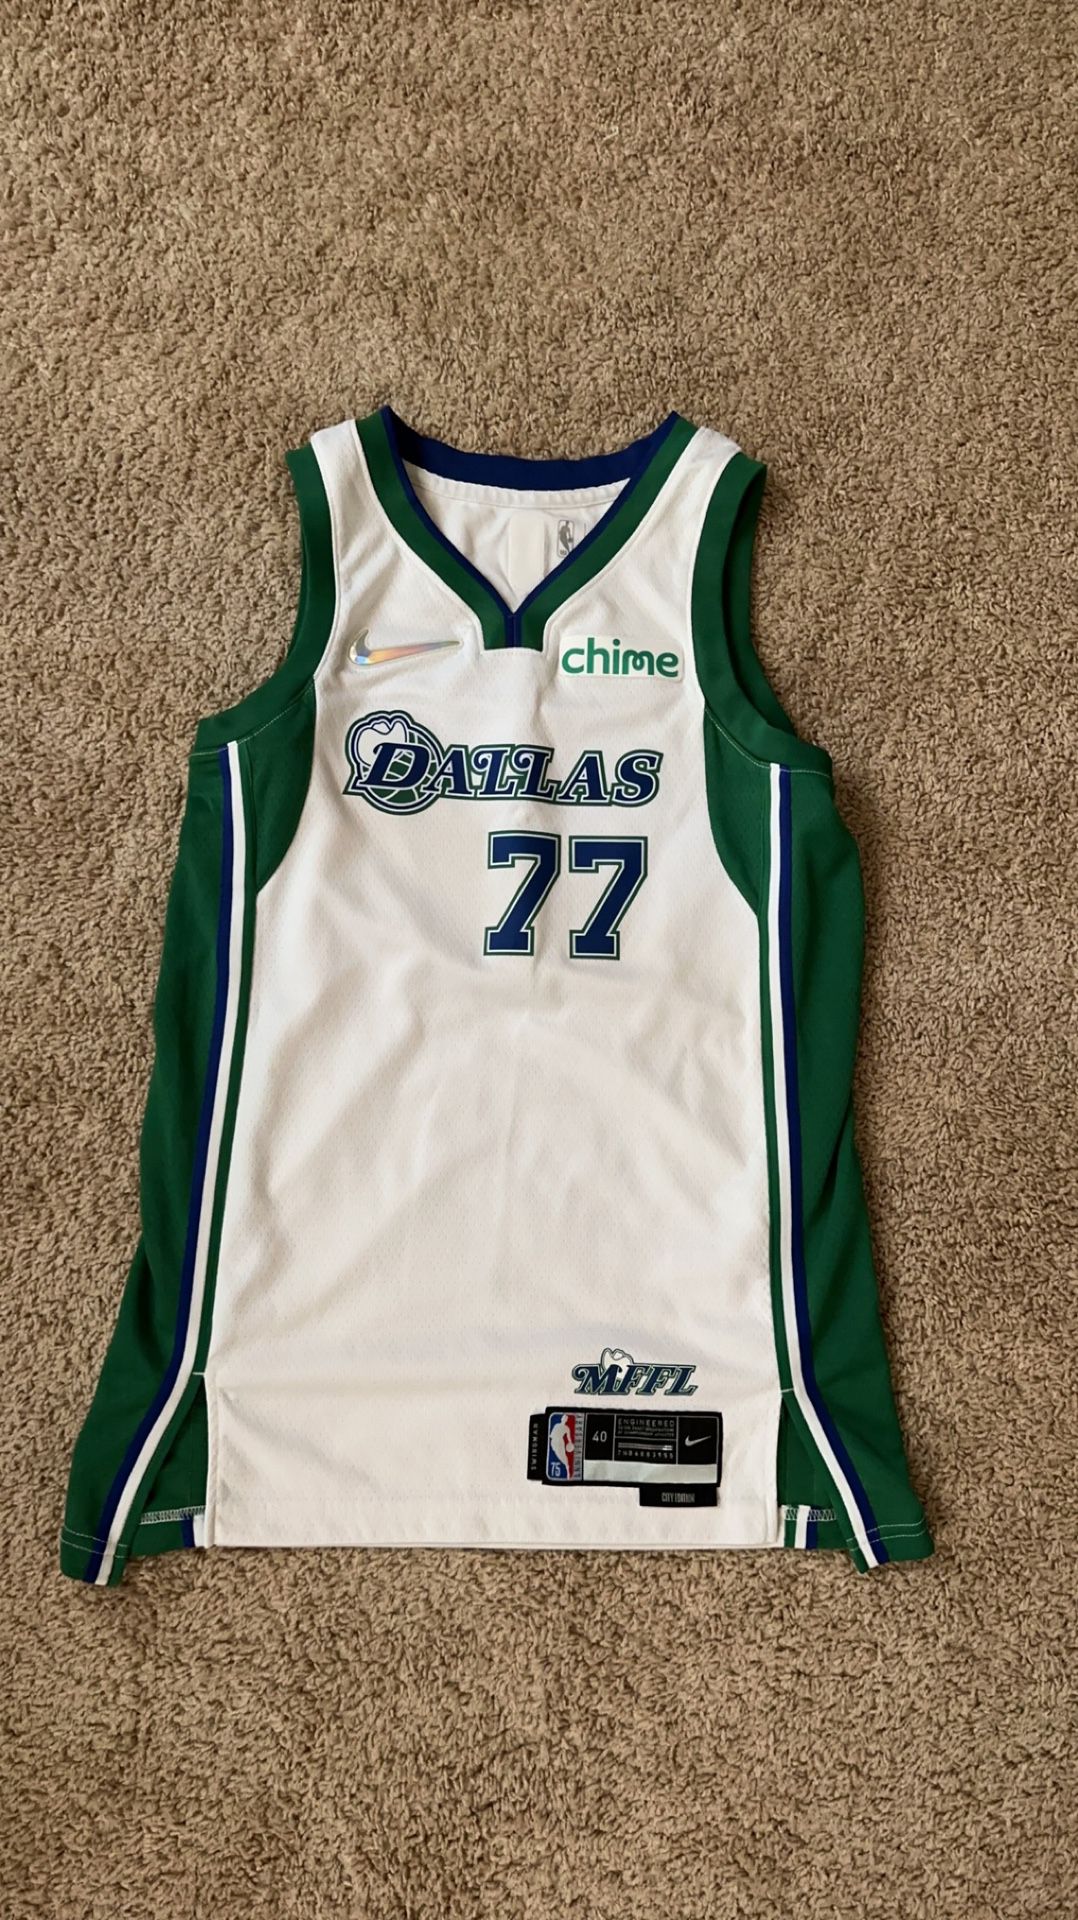 Luka Doncic Rookie Of The Year Jersey. for Sale in Fort Worth, TX - OfferUp